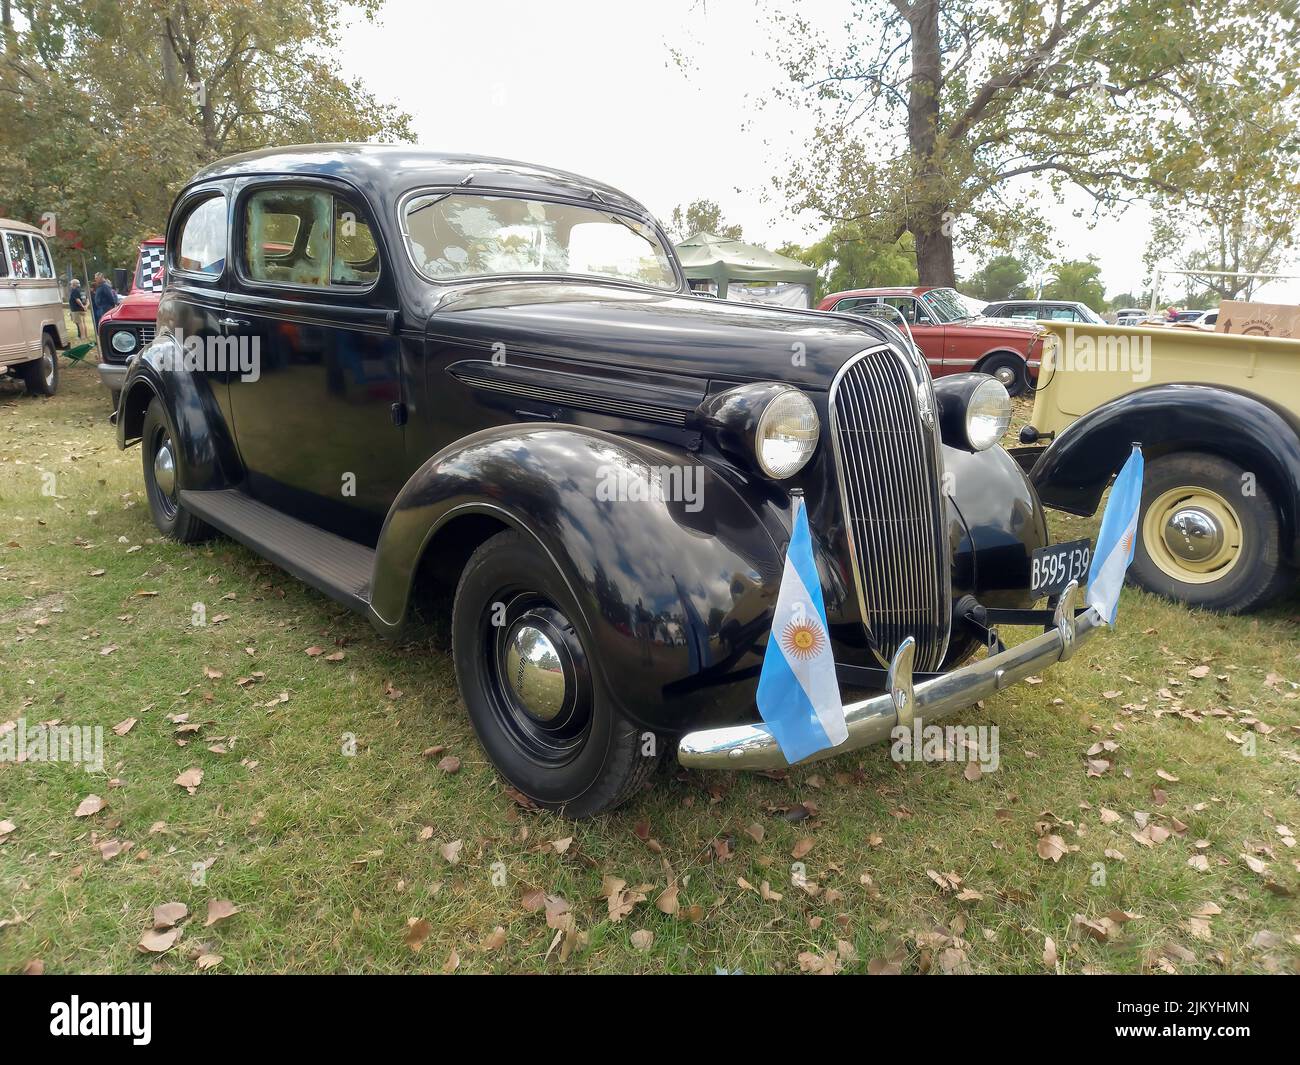 Chascomus, Argentina - Apr 9, 2022: Old black Plymouth two door fastback sedan circa 1937 parked in the countryside. Nature grass and trees background Stock Photo